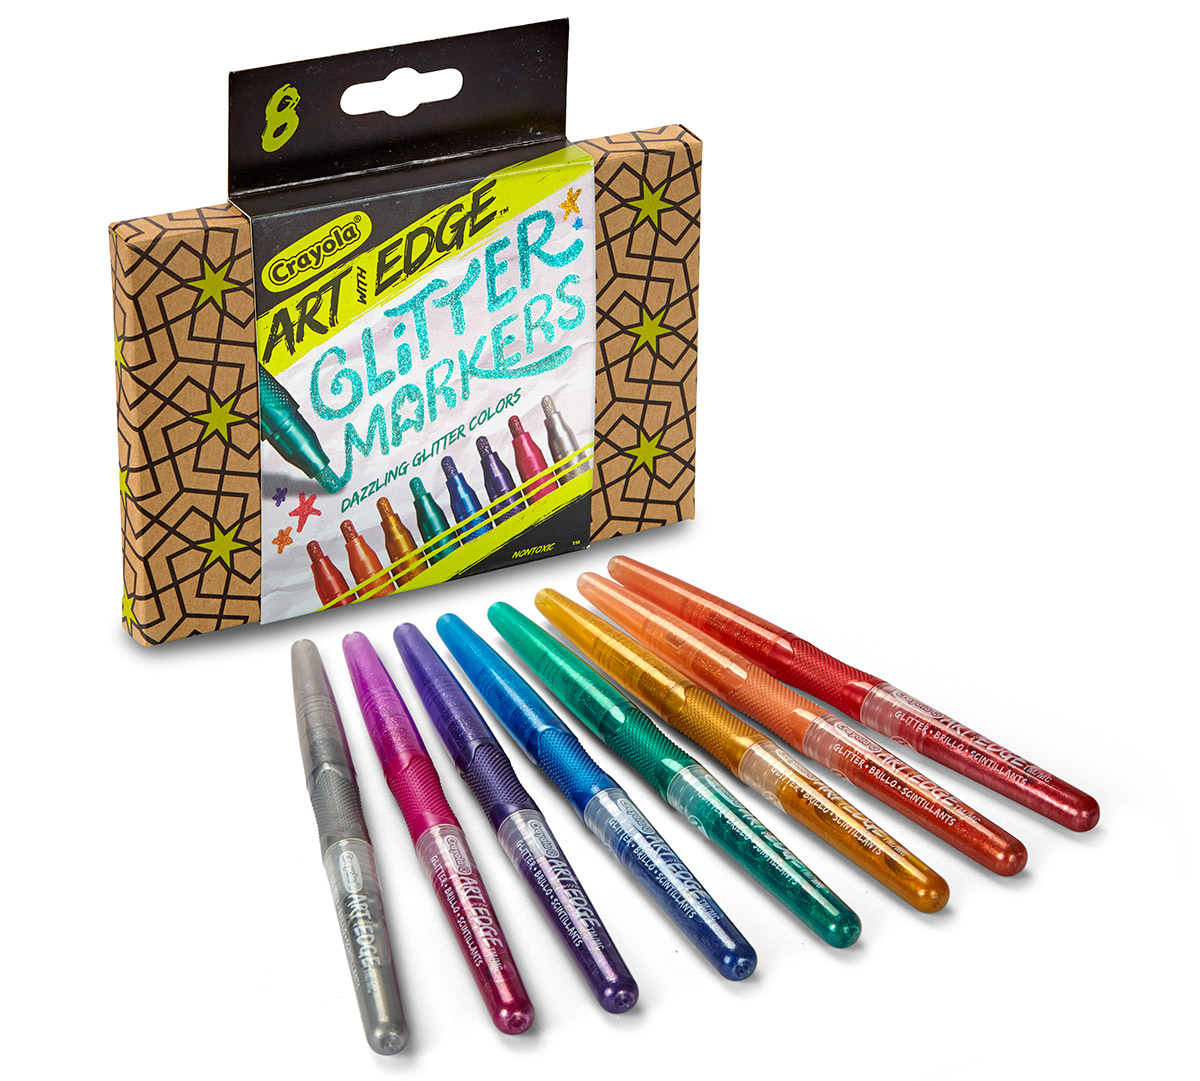 Crayola Art With Edge Glitter Markers 8 count Art Tools